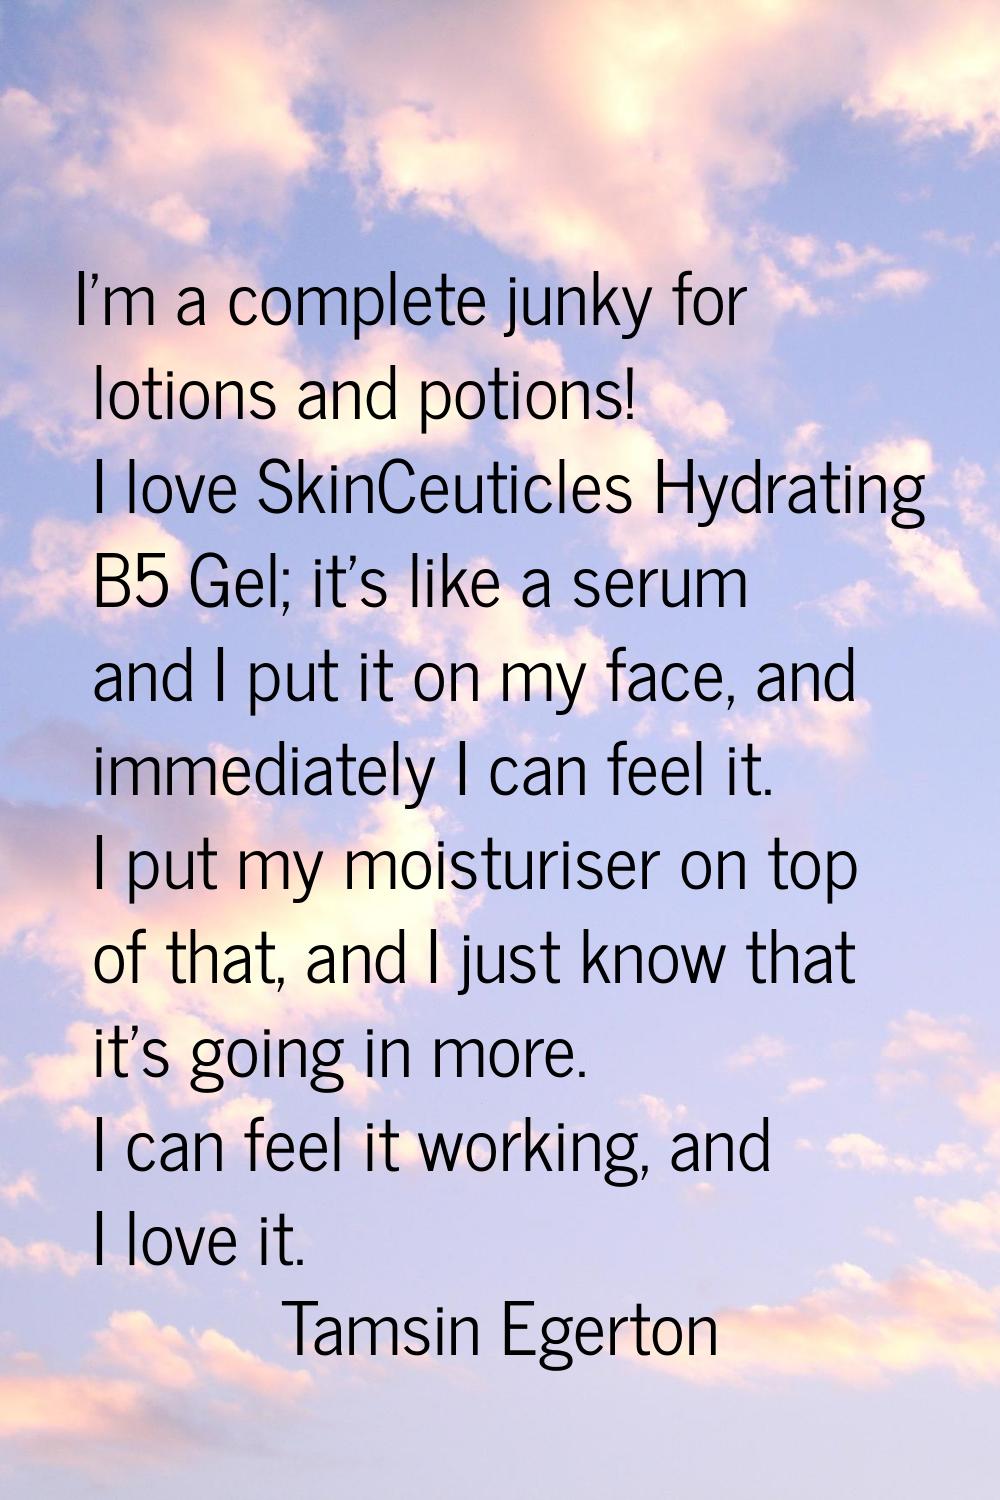 I'm a complete junky for lotions and potions! I love SkinCeuticles Hydrating B5 Gel; it's like a se